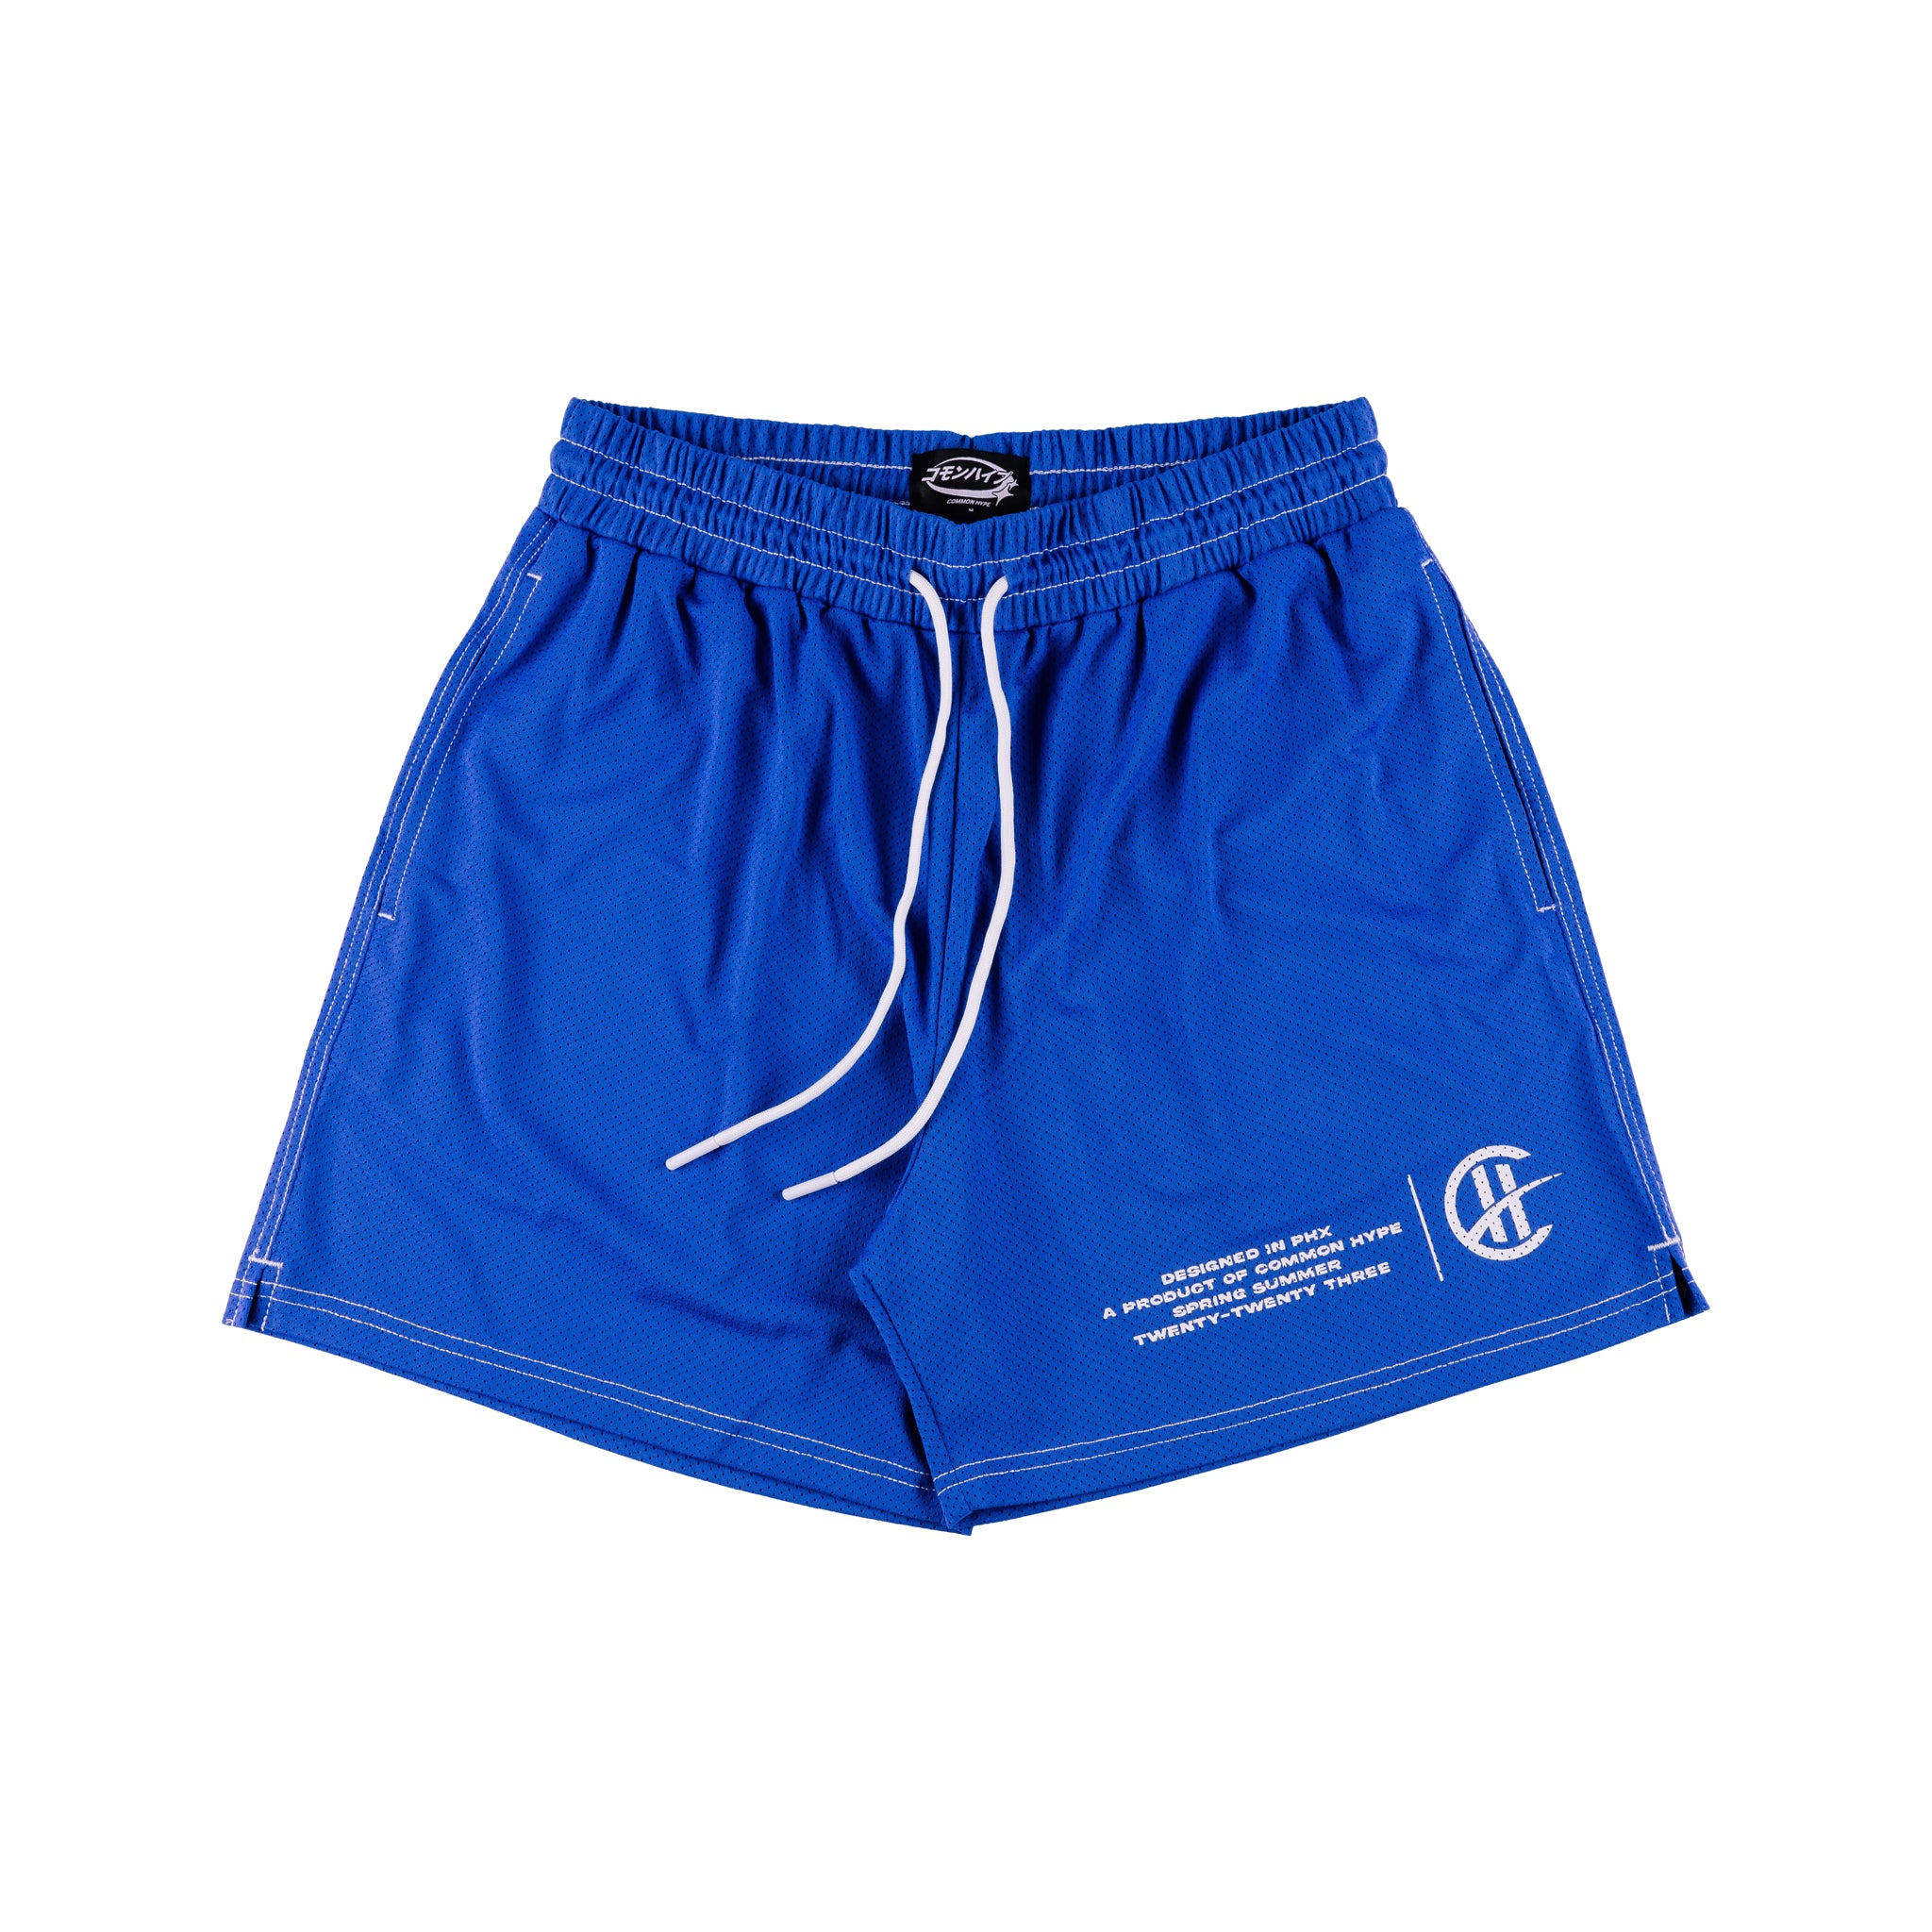 Common Hype Royal Blue Contrast Stitching Mesh Short